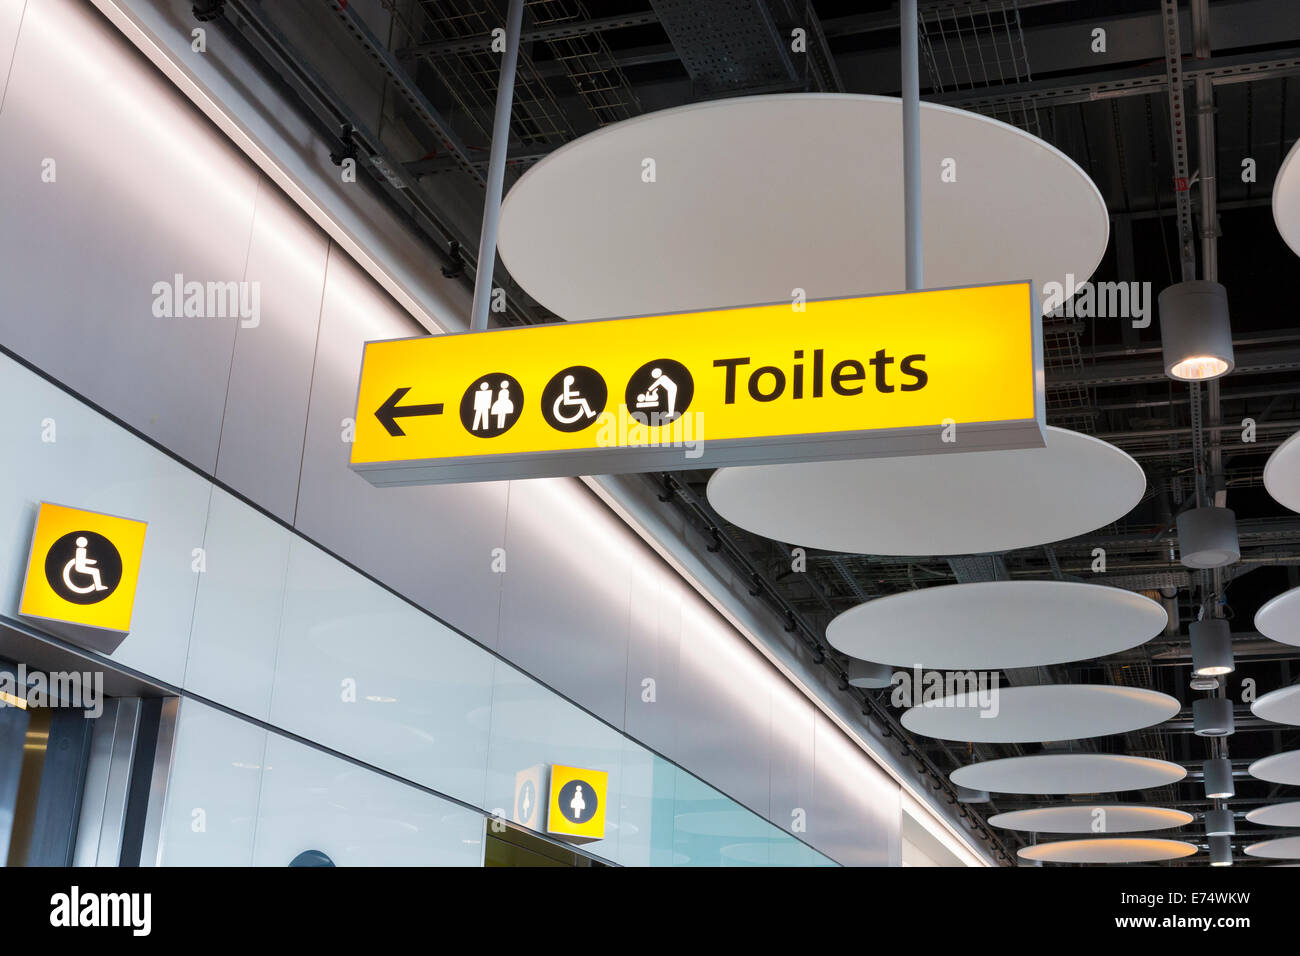 Toilet sign at airport, UK Stock Photo